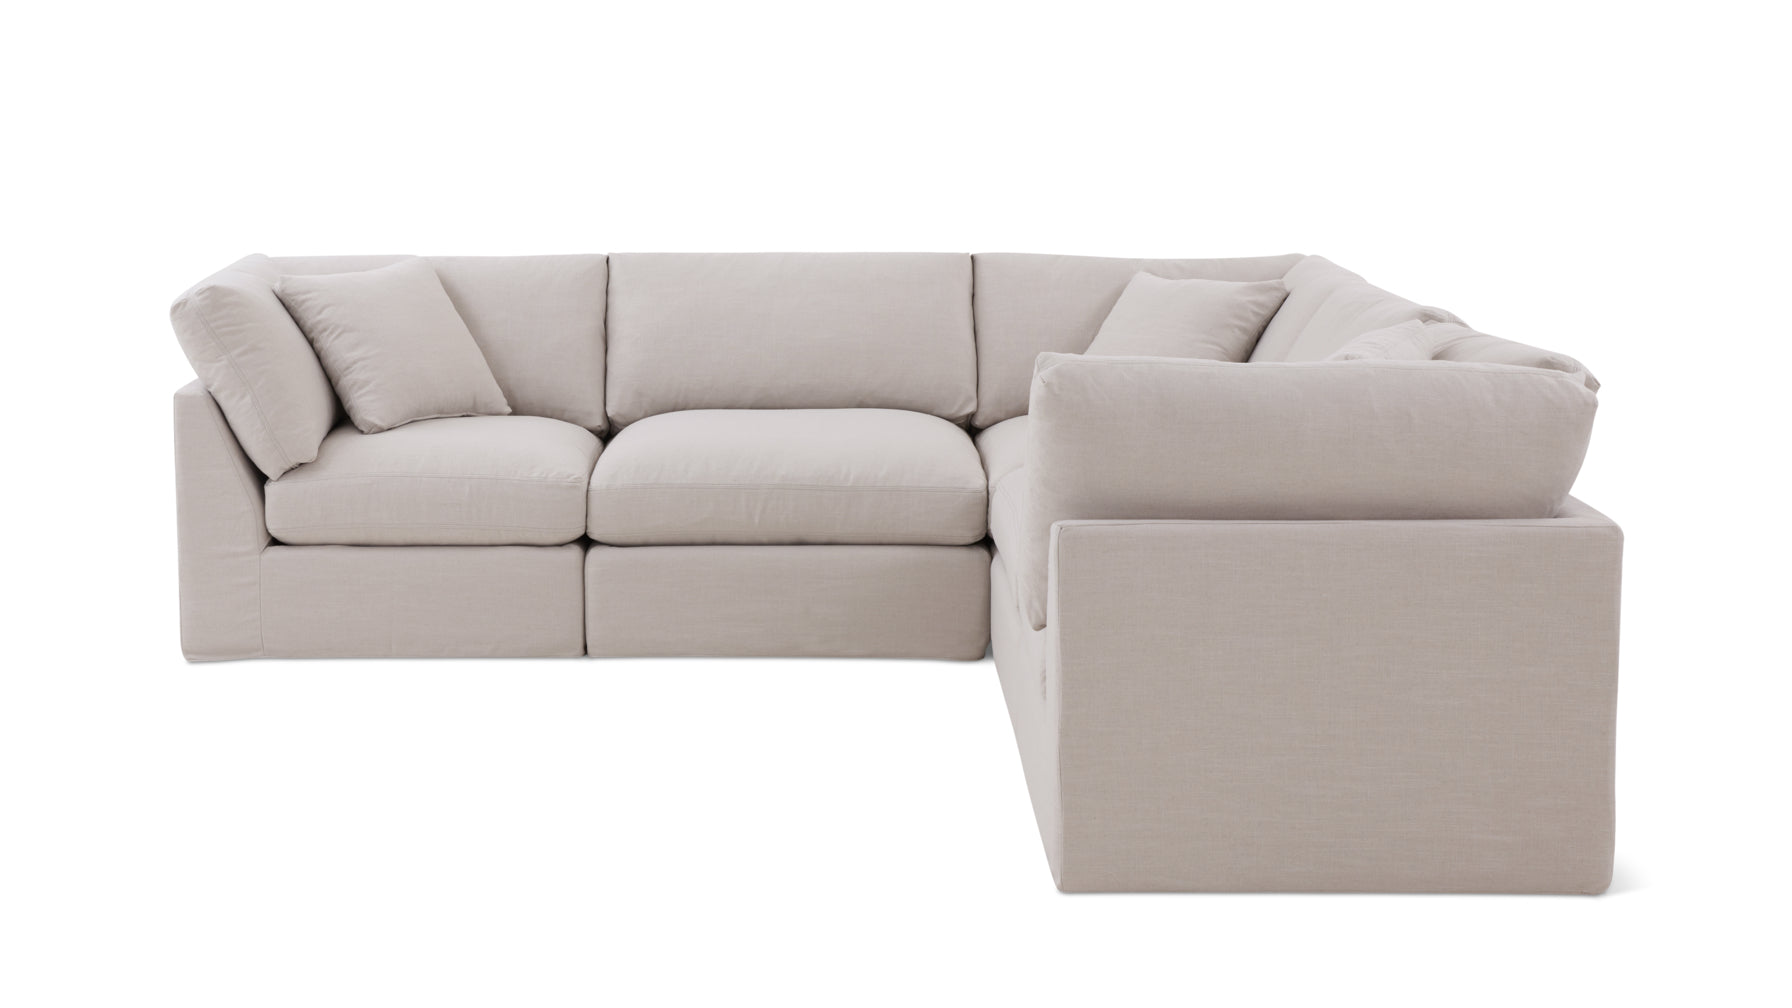 Get Together™ 5-Piece Modular Sectional Closed, Standard, Clay - Image 5